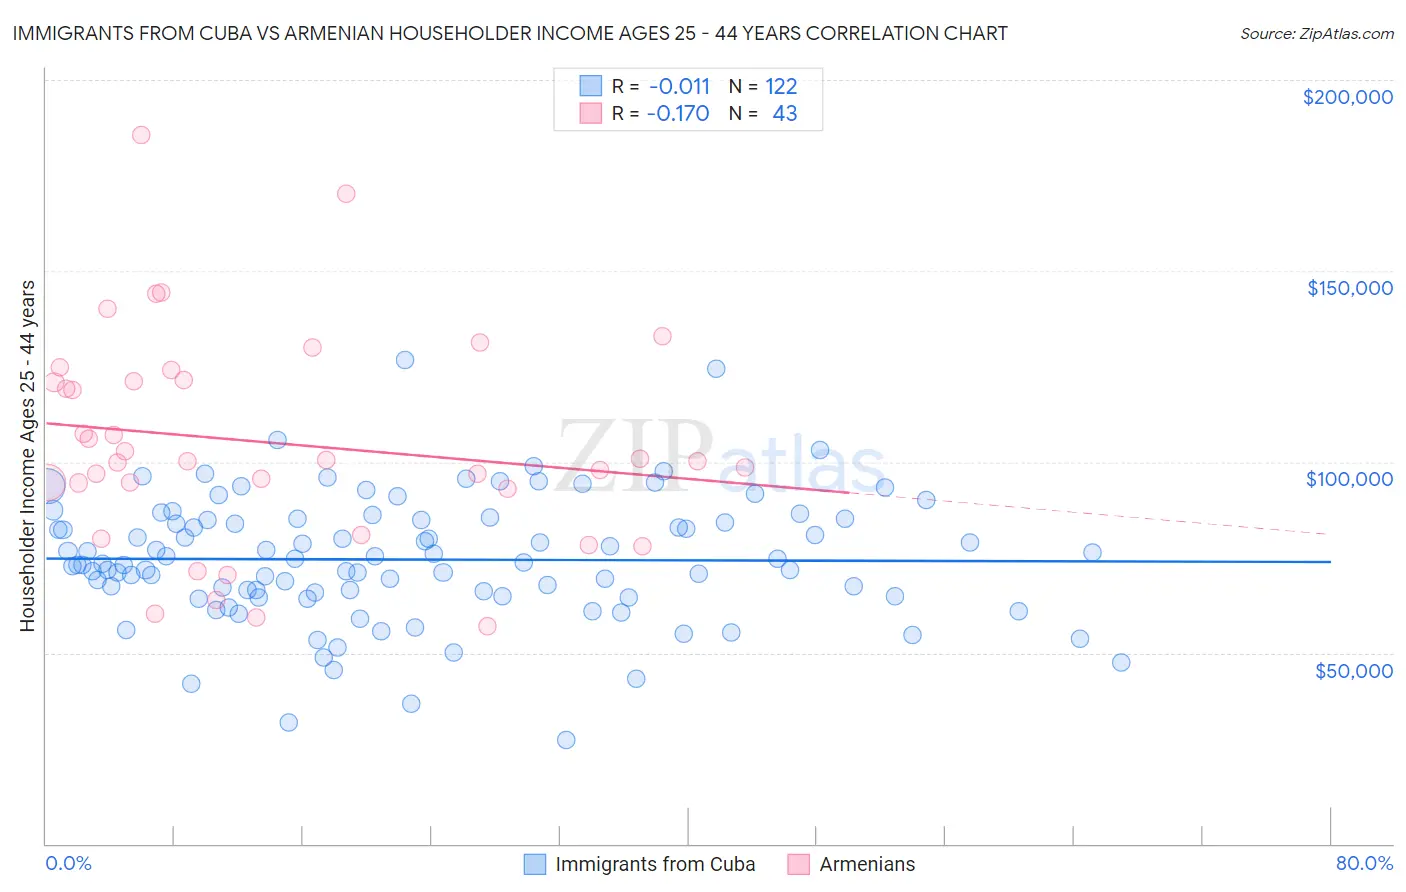 Immigrants from Cuba vs Armenian Householder Income Ages 25 - 44 years